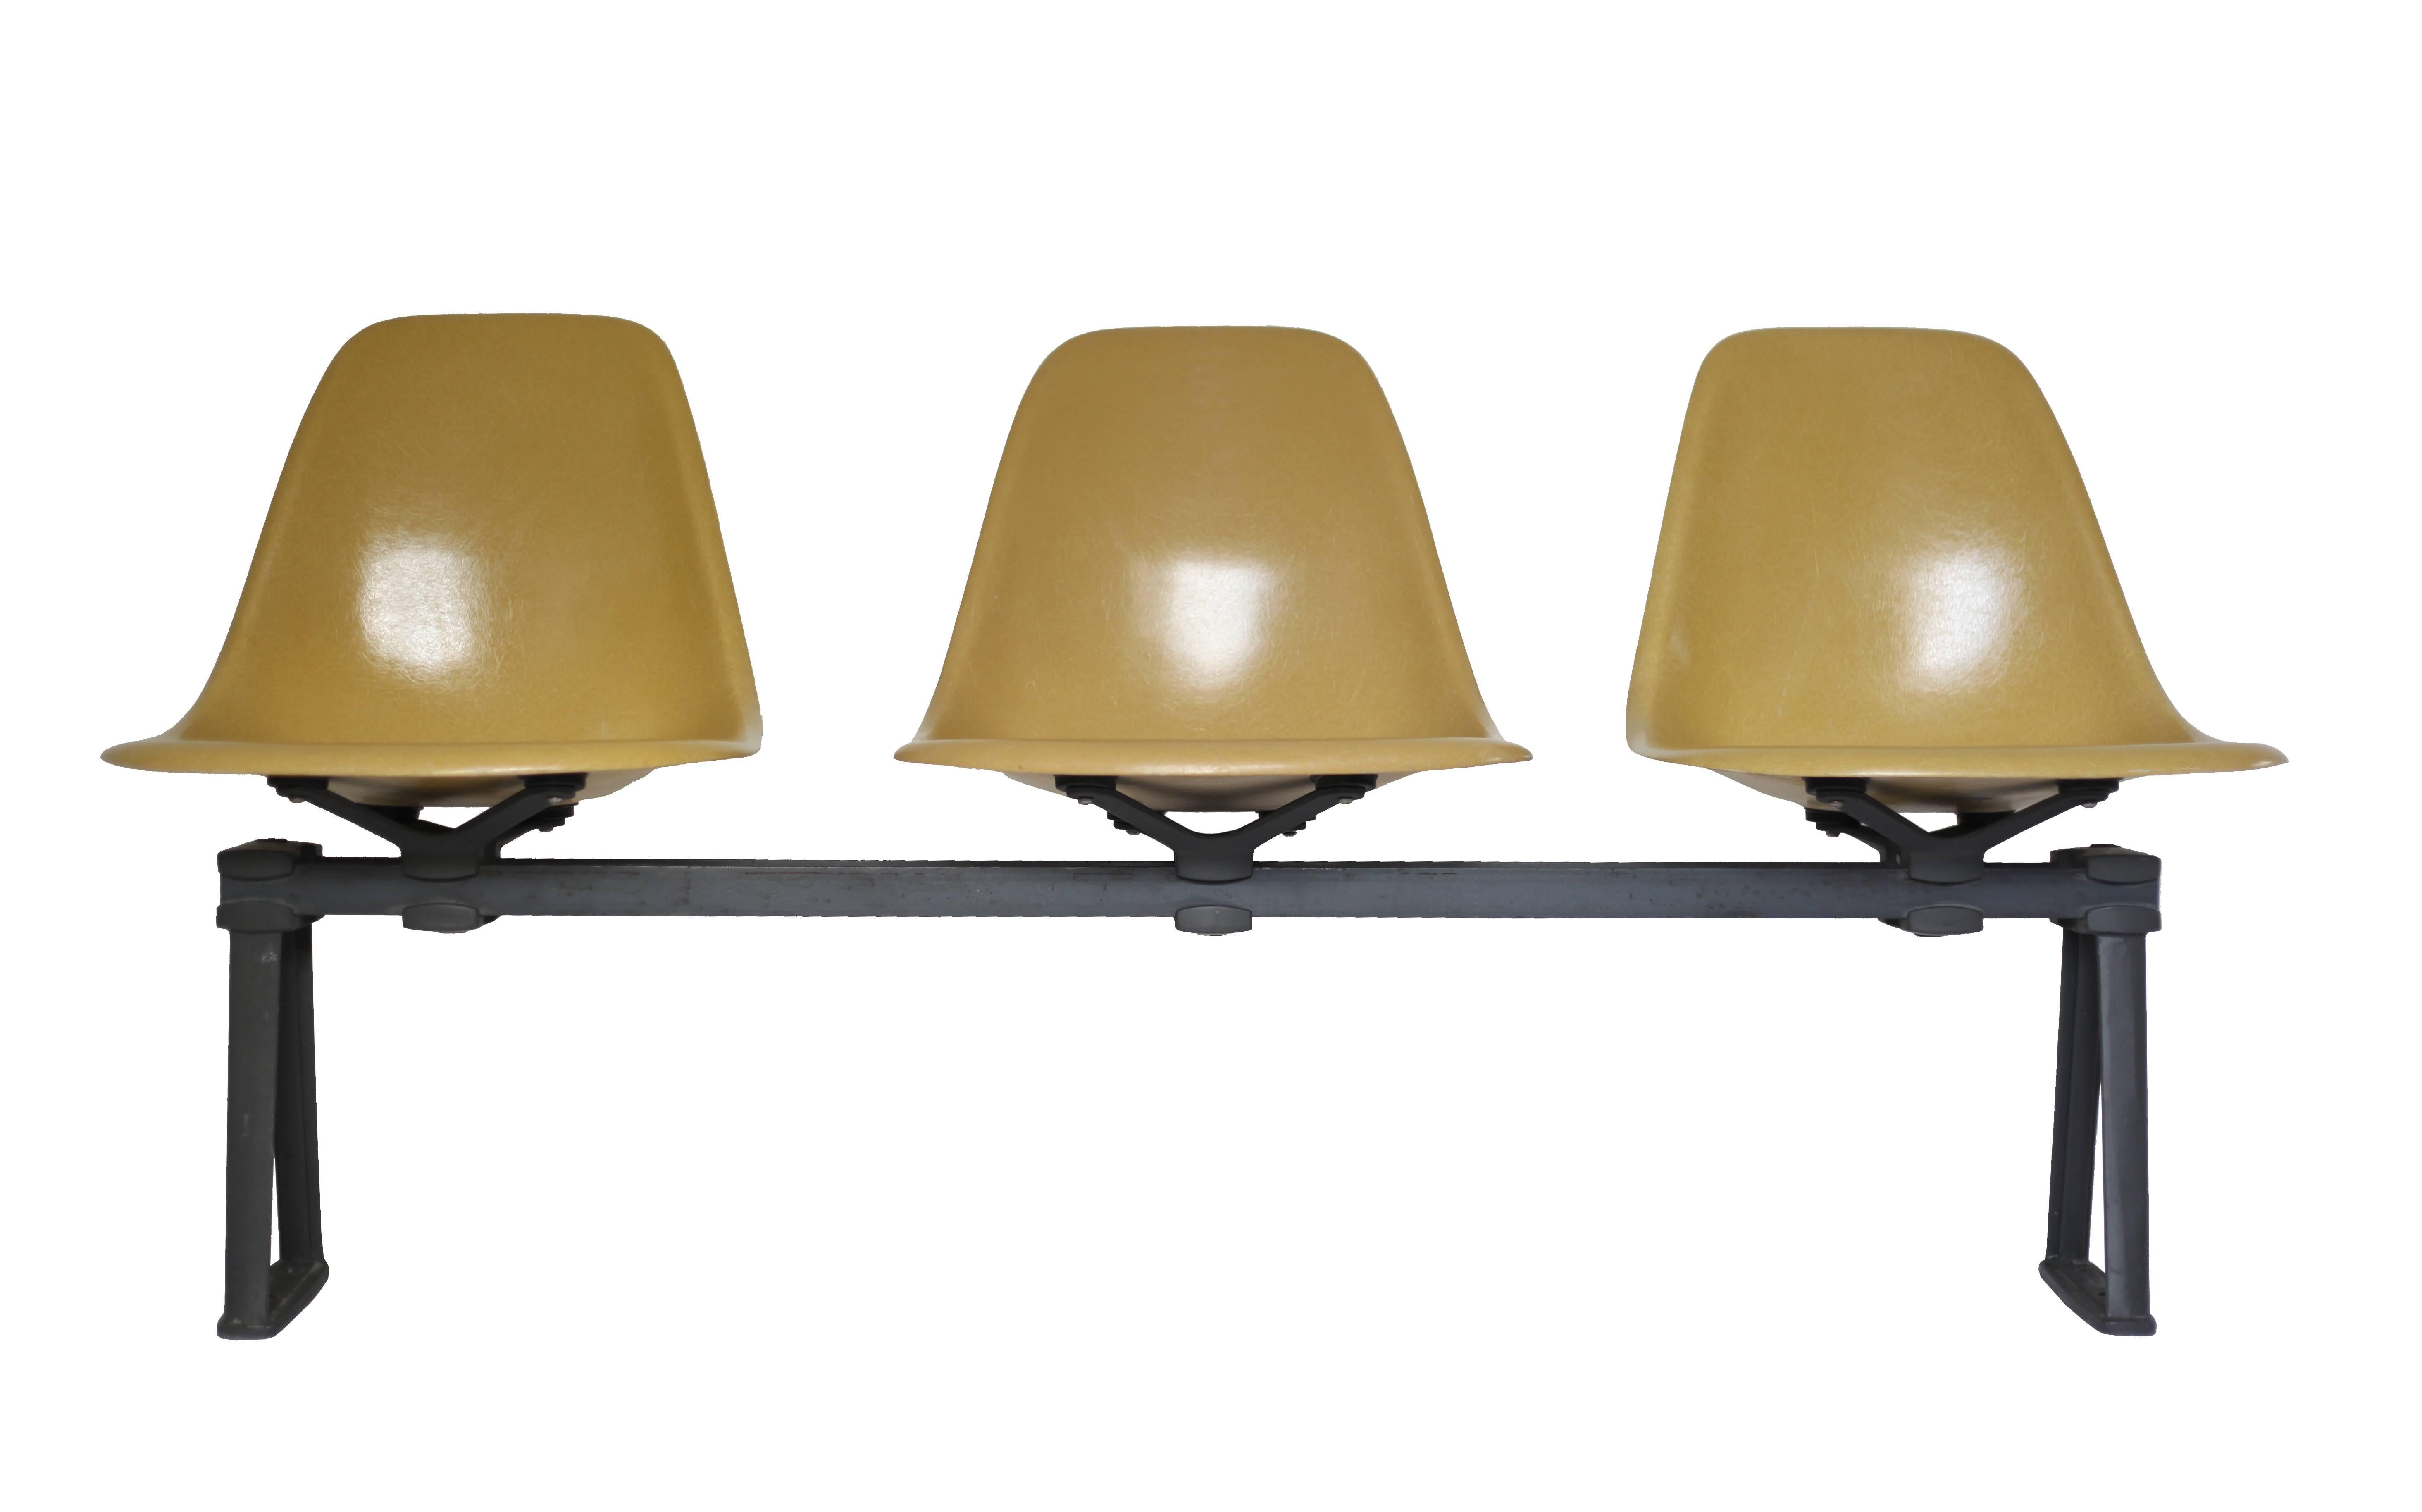 Vintage 1968 Herman Miller Ochre color fiberglass chairs on rare bench/tandem seating. The price is for 3 seats and 1 tandem base. Multiple sets are available. 6 seat tandem bases are available also. Please inquire about quantities. Comfortable,